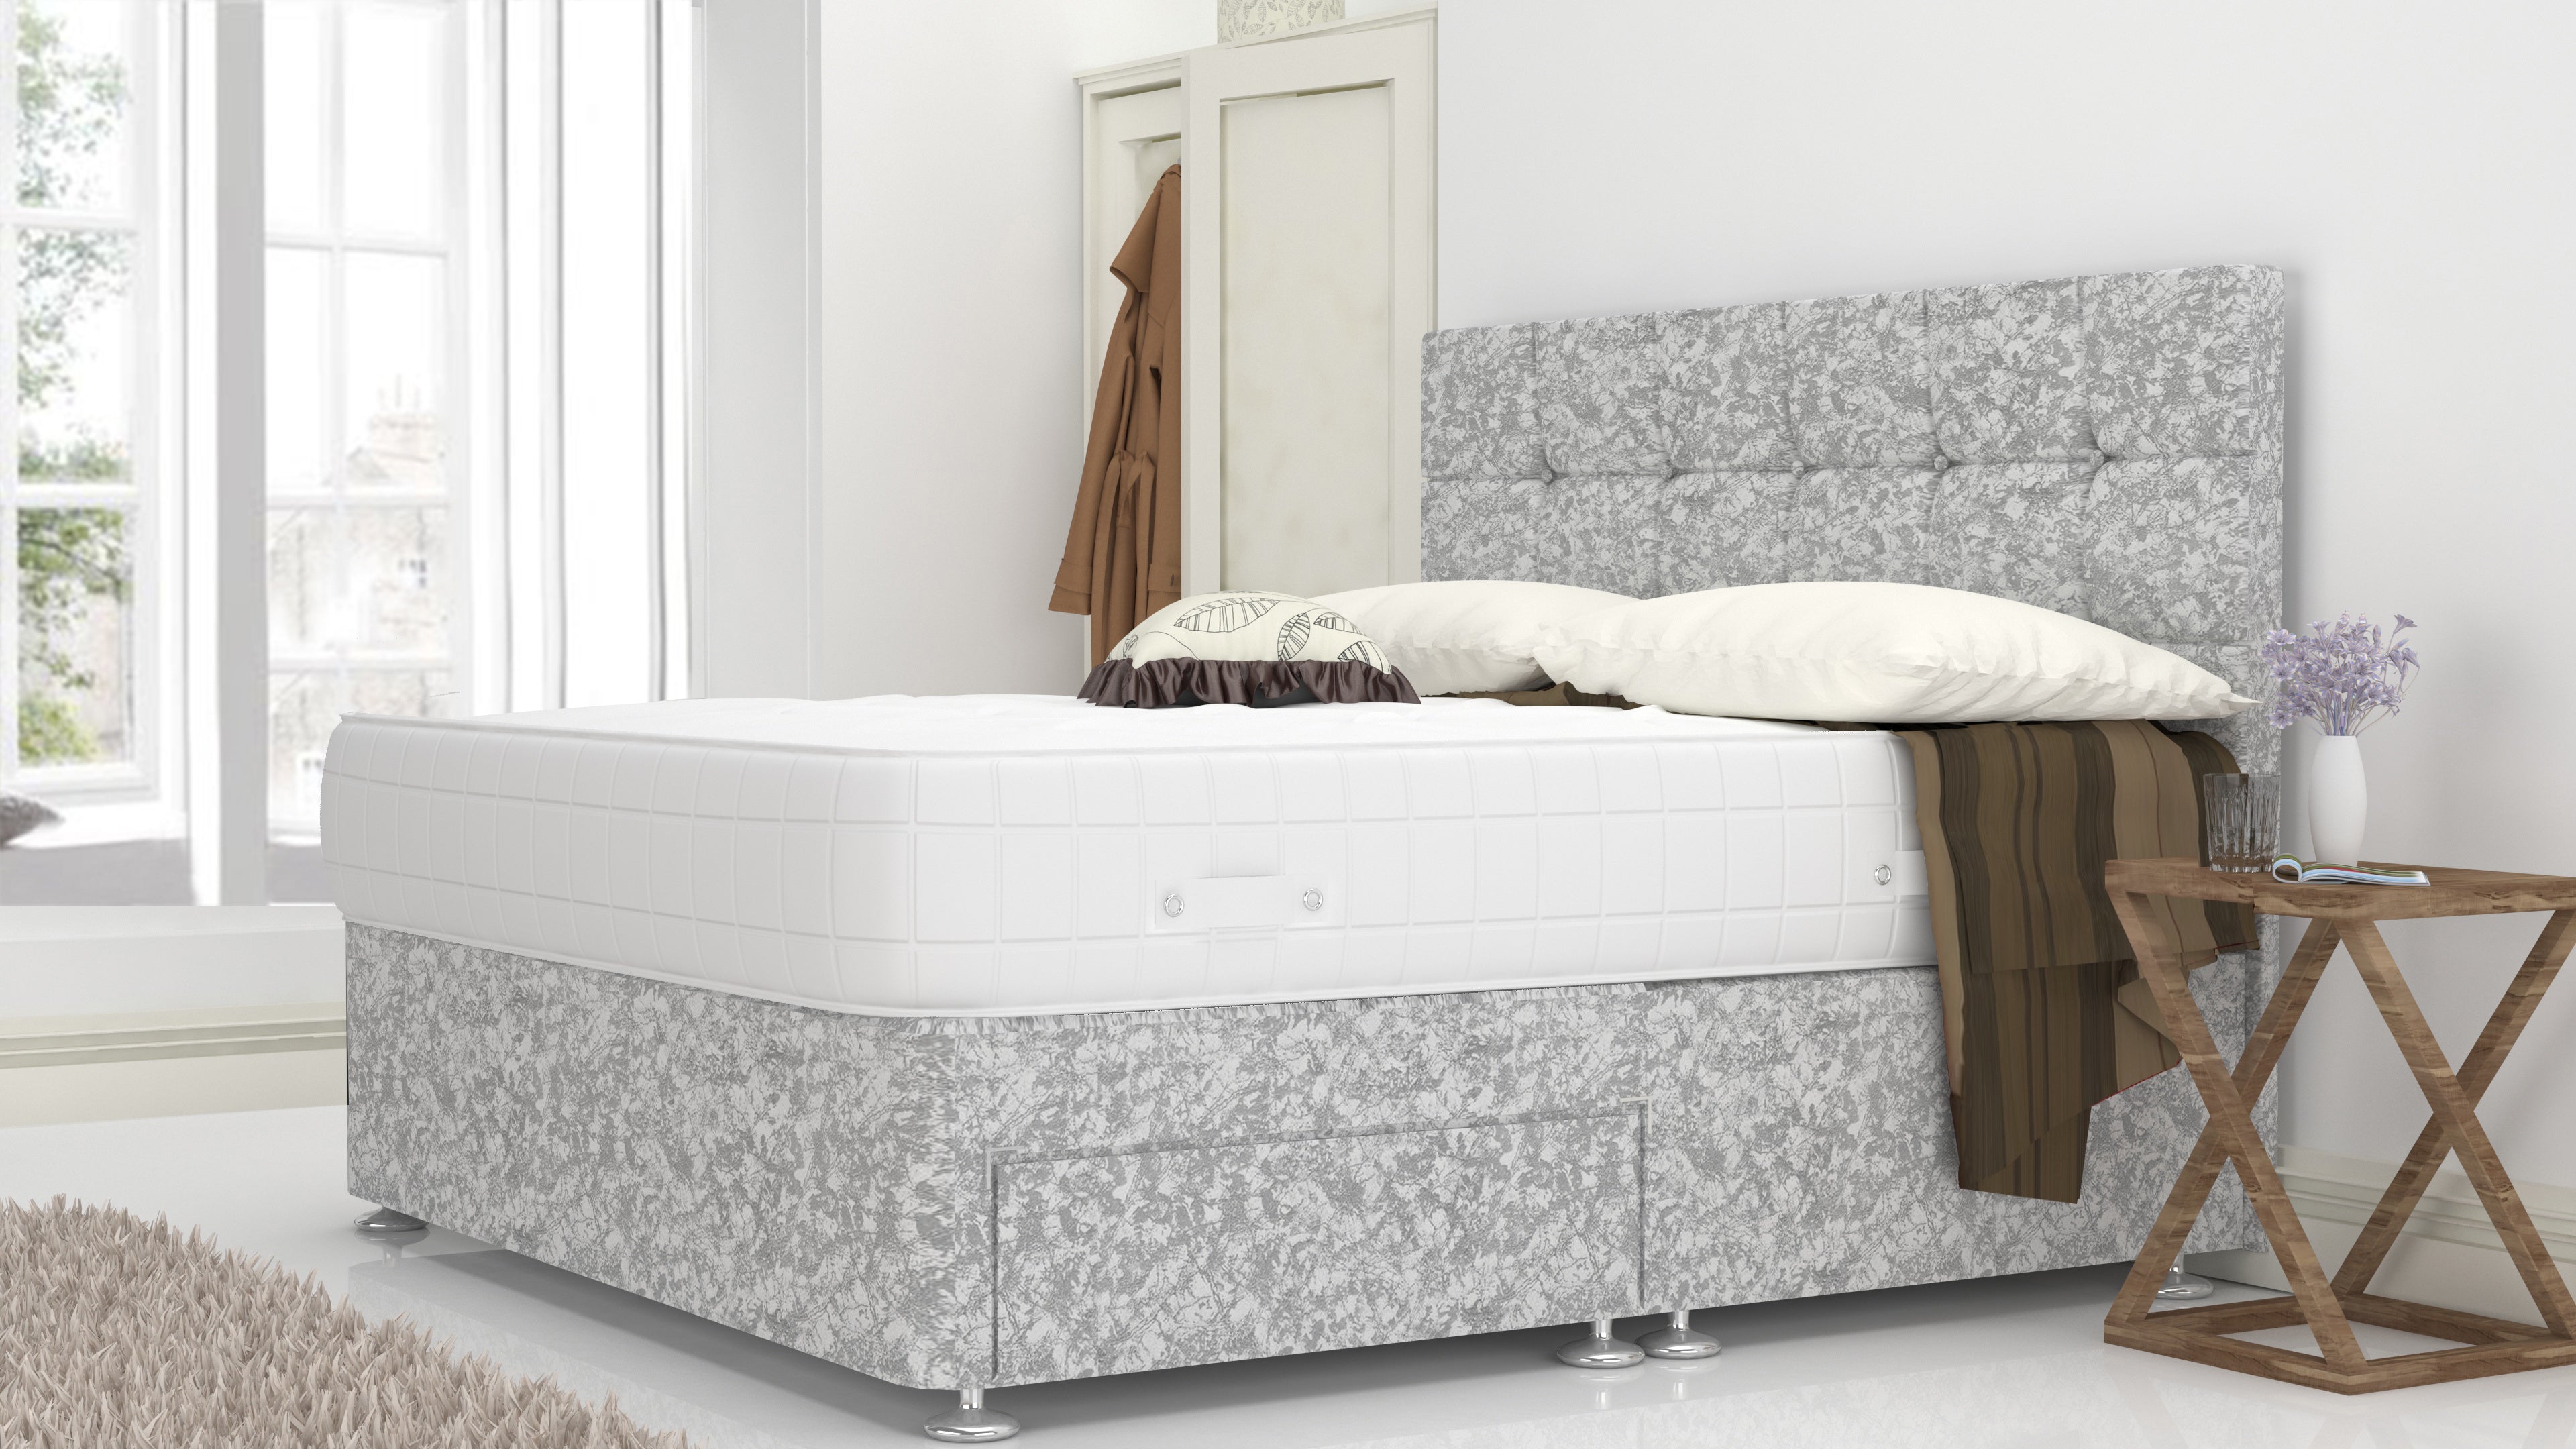 Silver Crushed 5 Feet Divan Bed Set With Cube Headboard (Included Feet) And Free Orthopedic Mattress